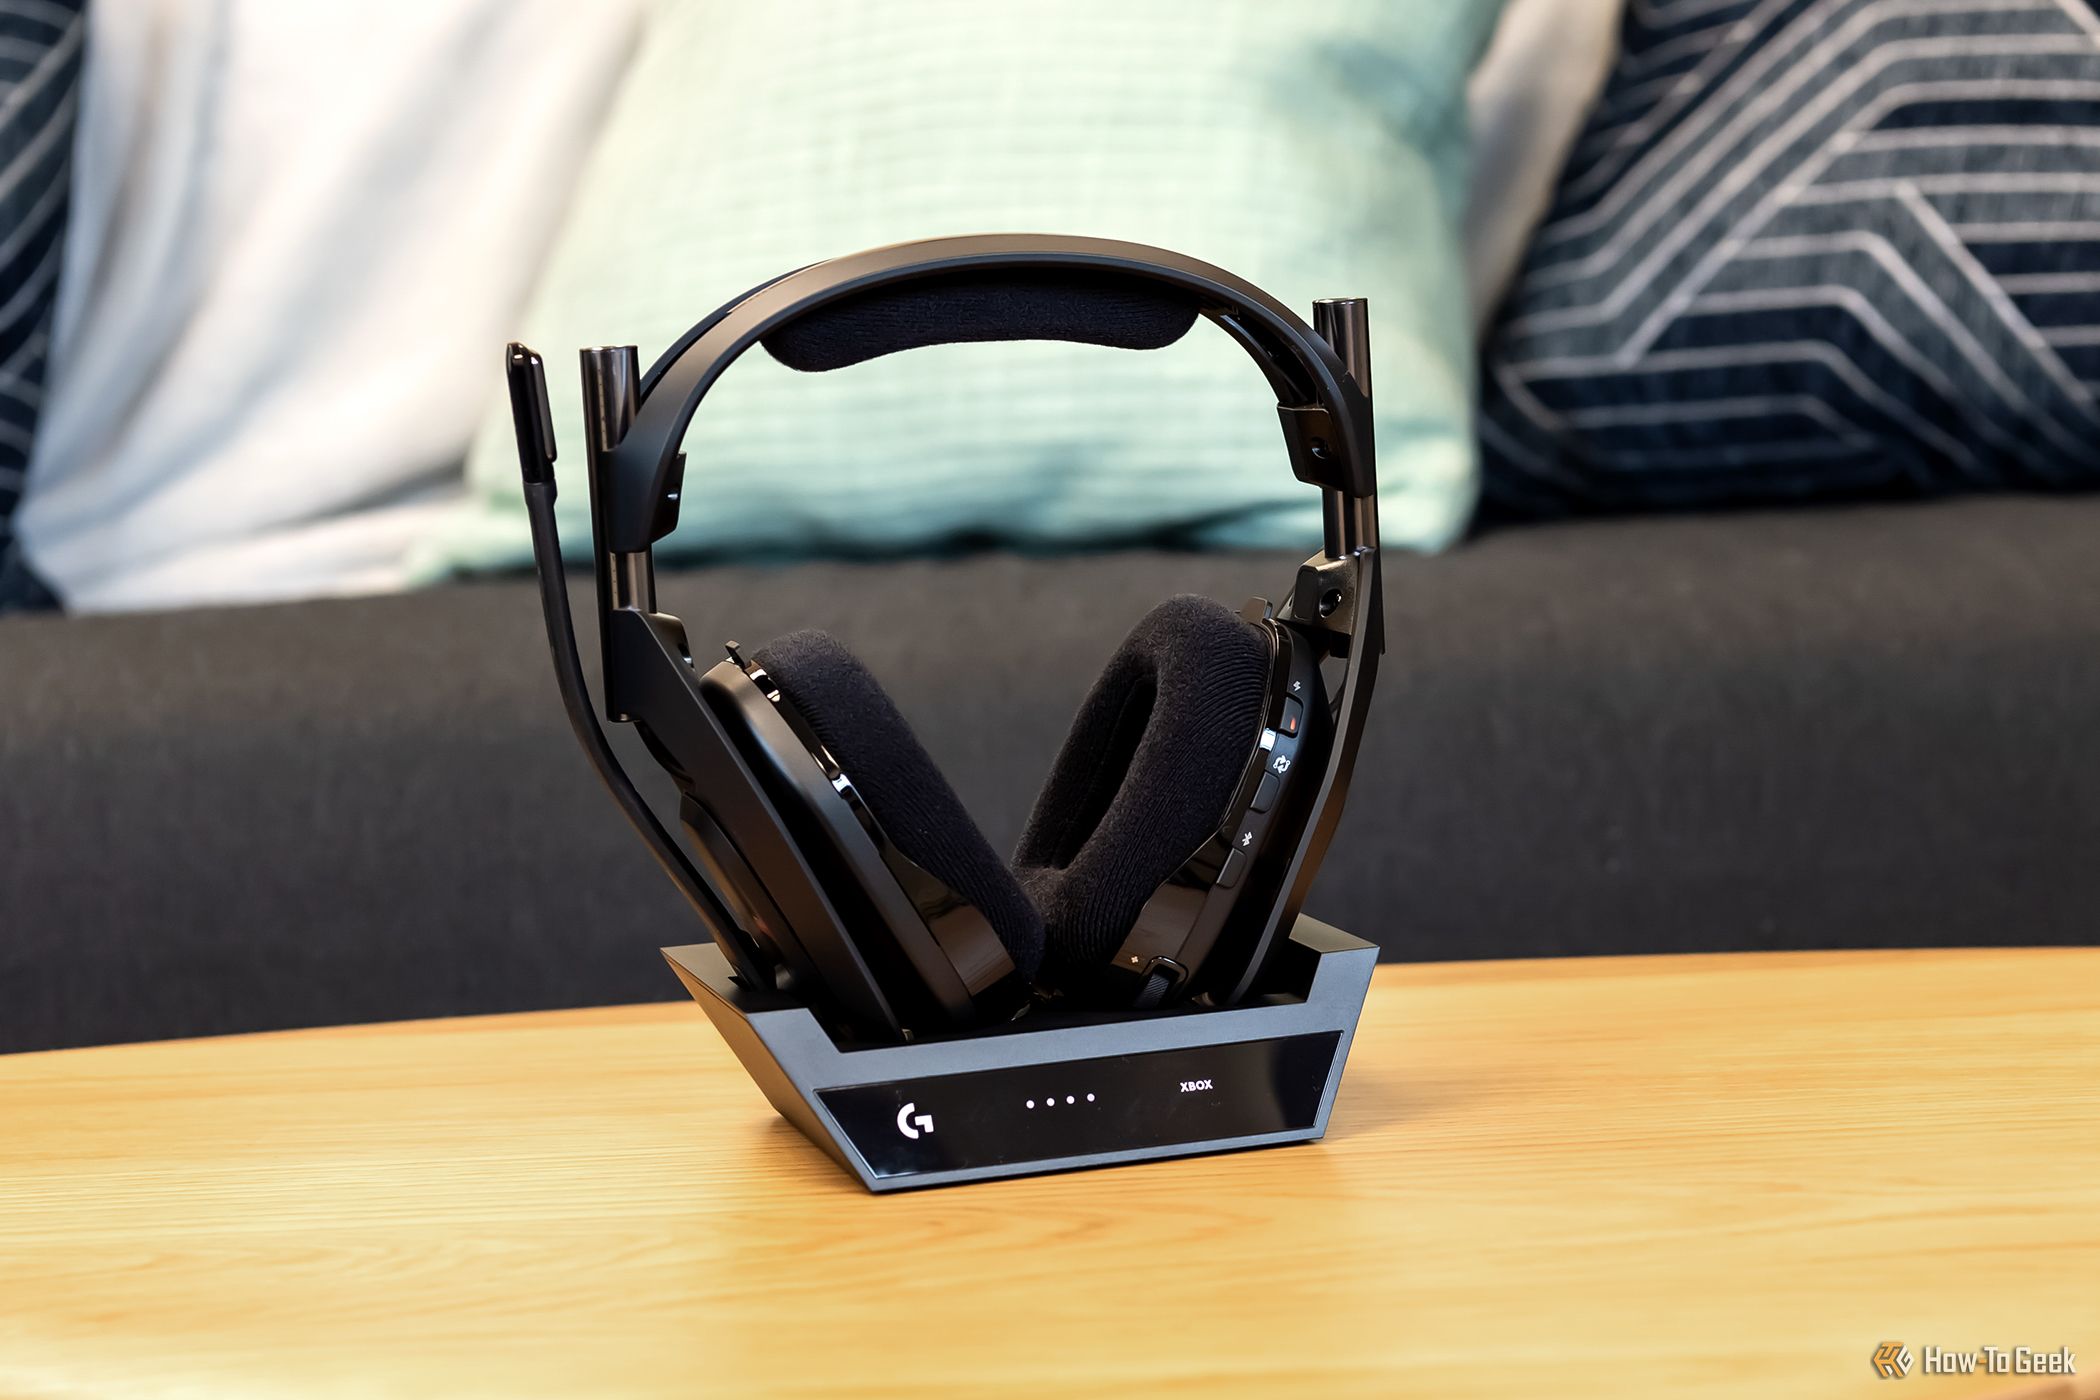  The Logitech G Astro A50 X headset in its dock.